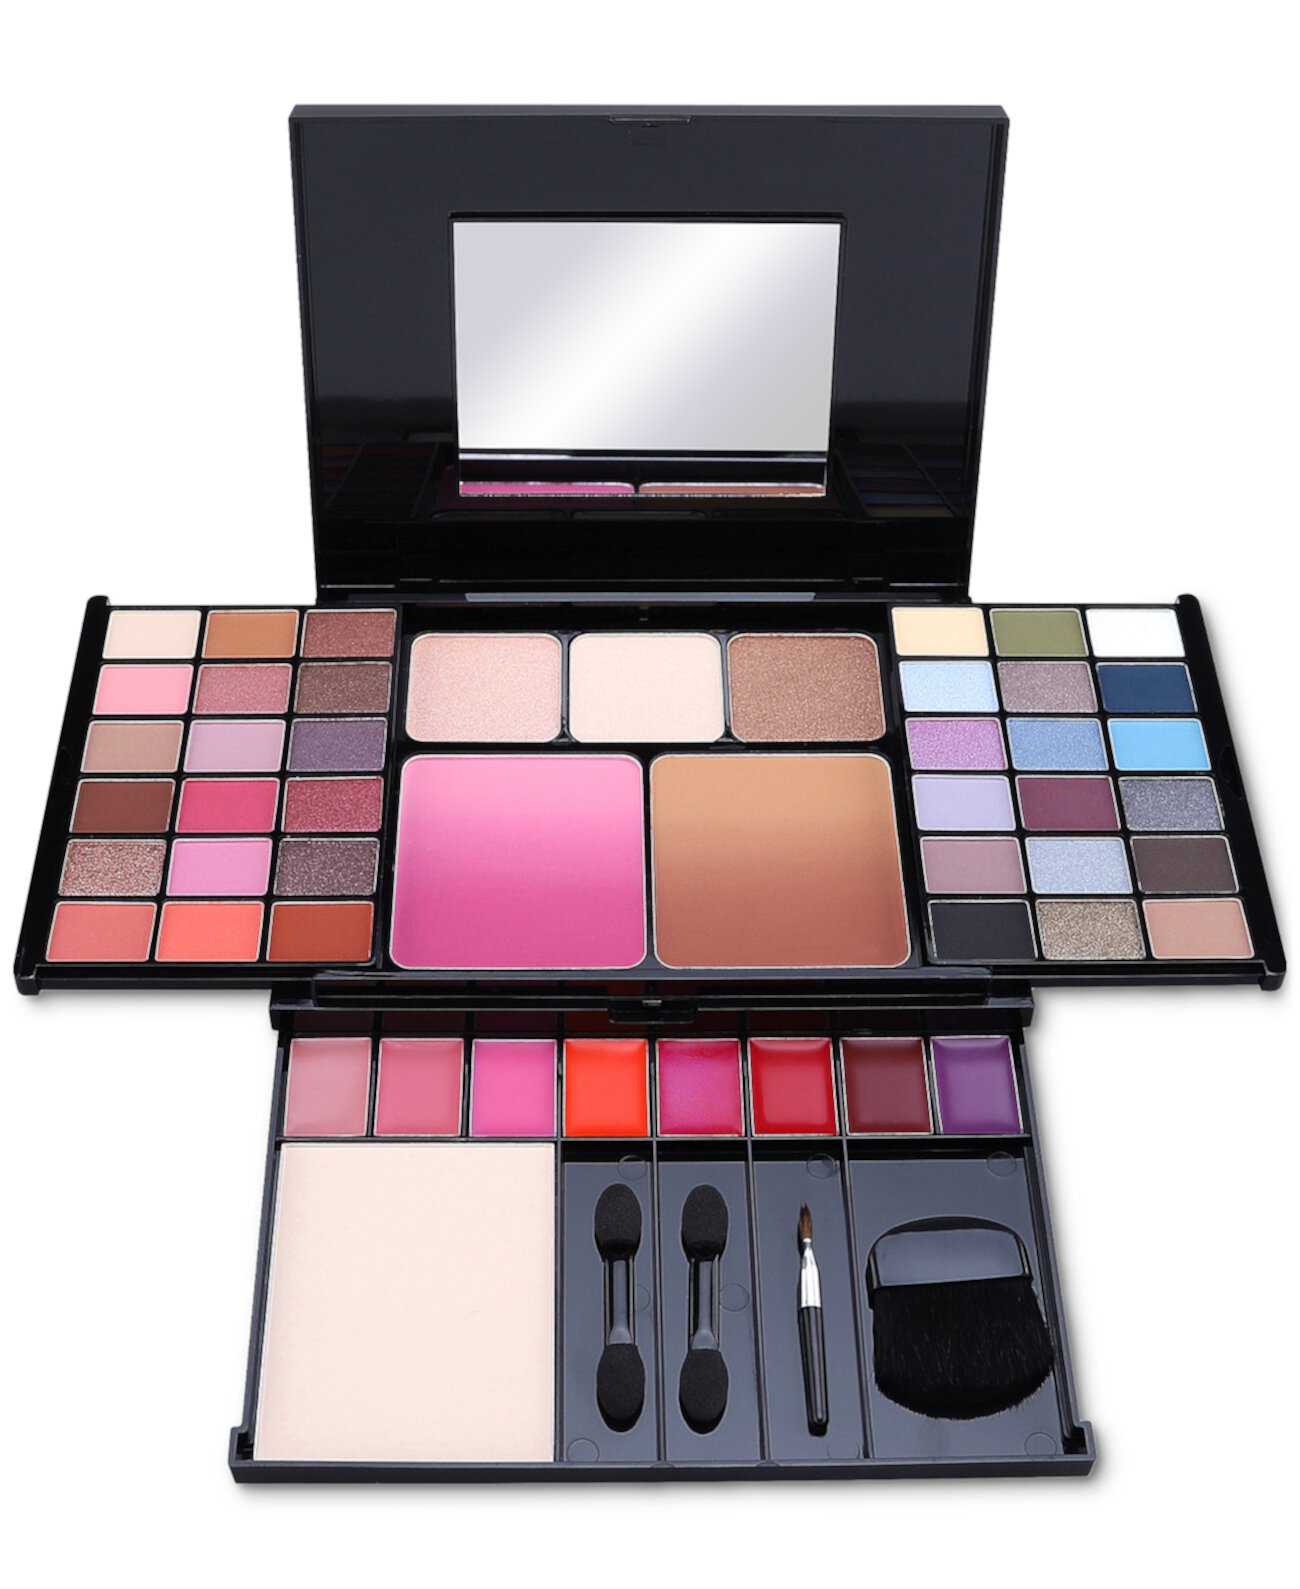 Star Studded All-In-One Beauty Collection, Created for Macy's Created For Macy's